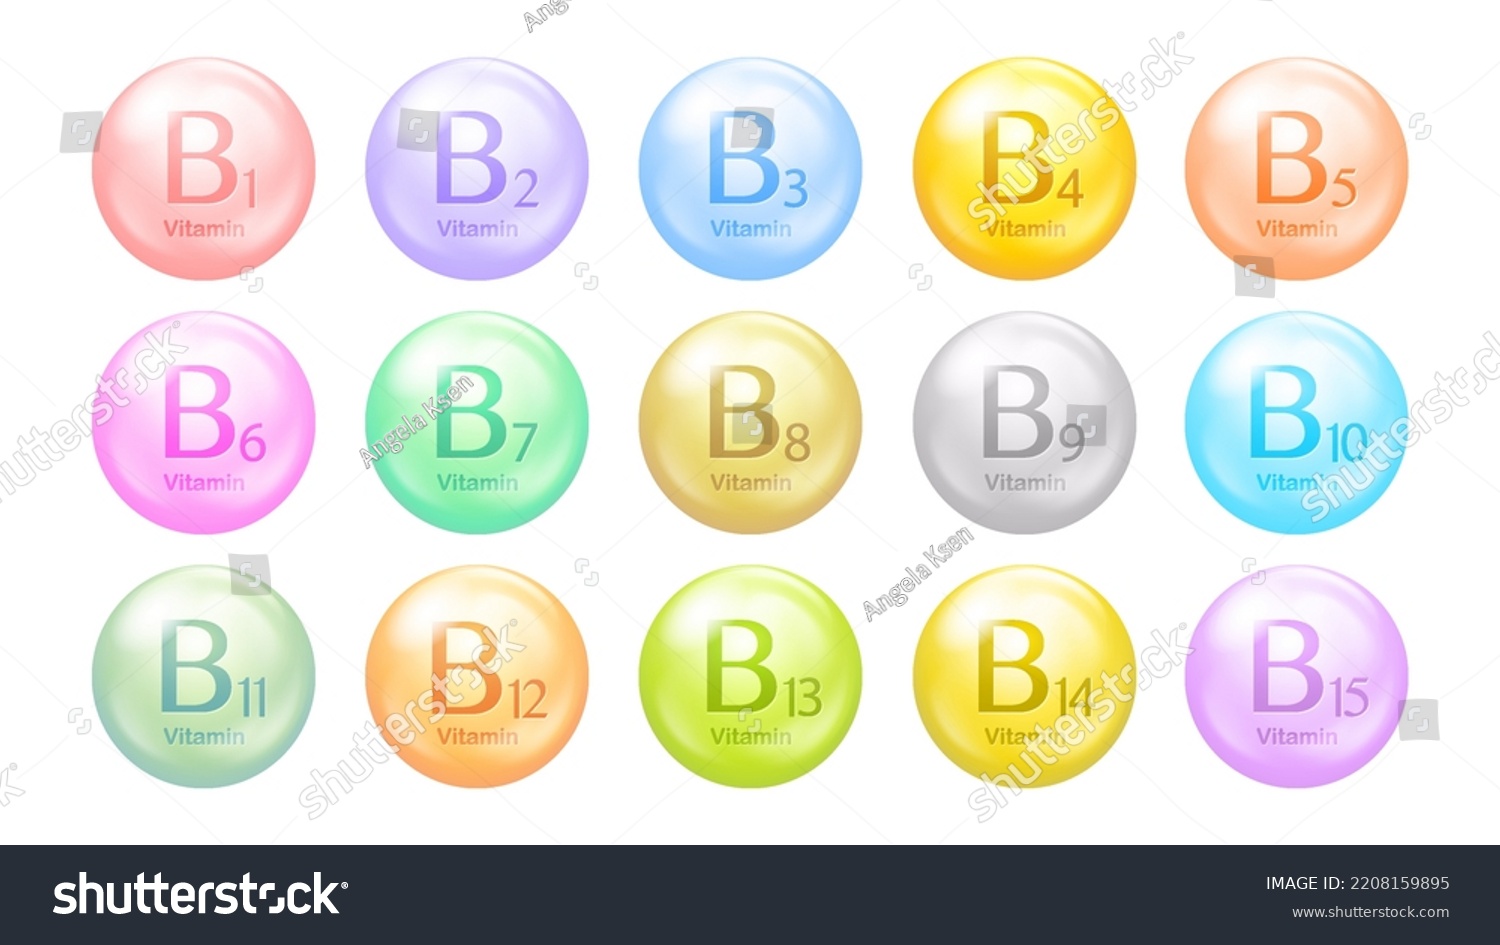 Vitamins B group vector icons. Set of round multicolored pills. Healthy life concept #2208159895